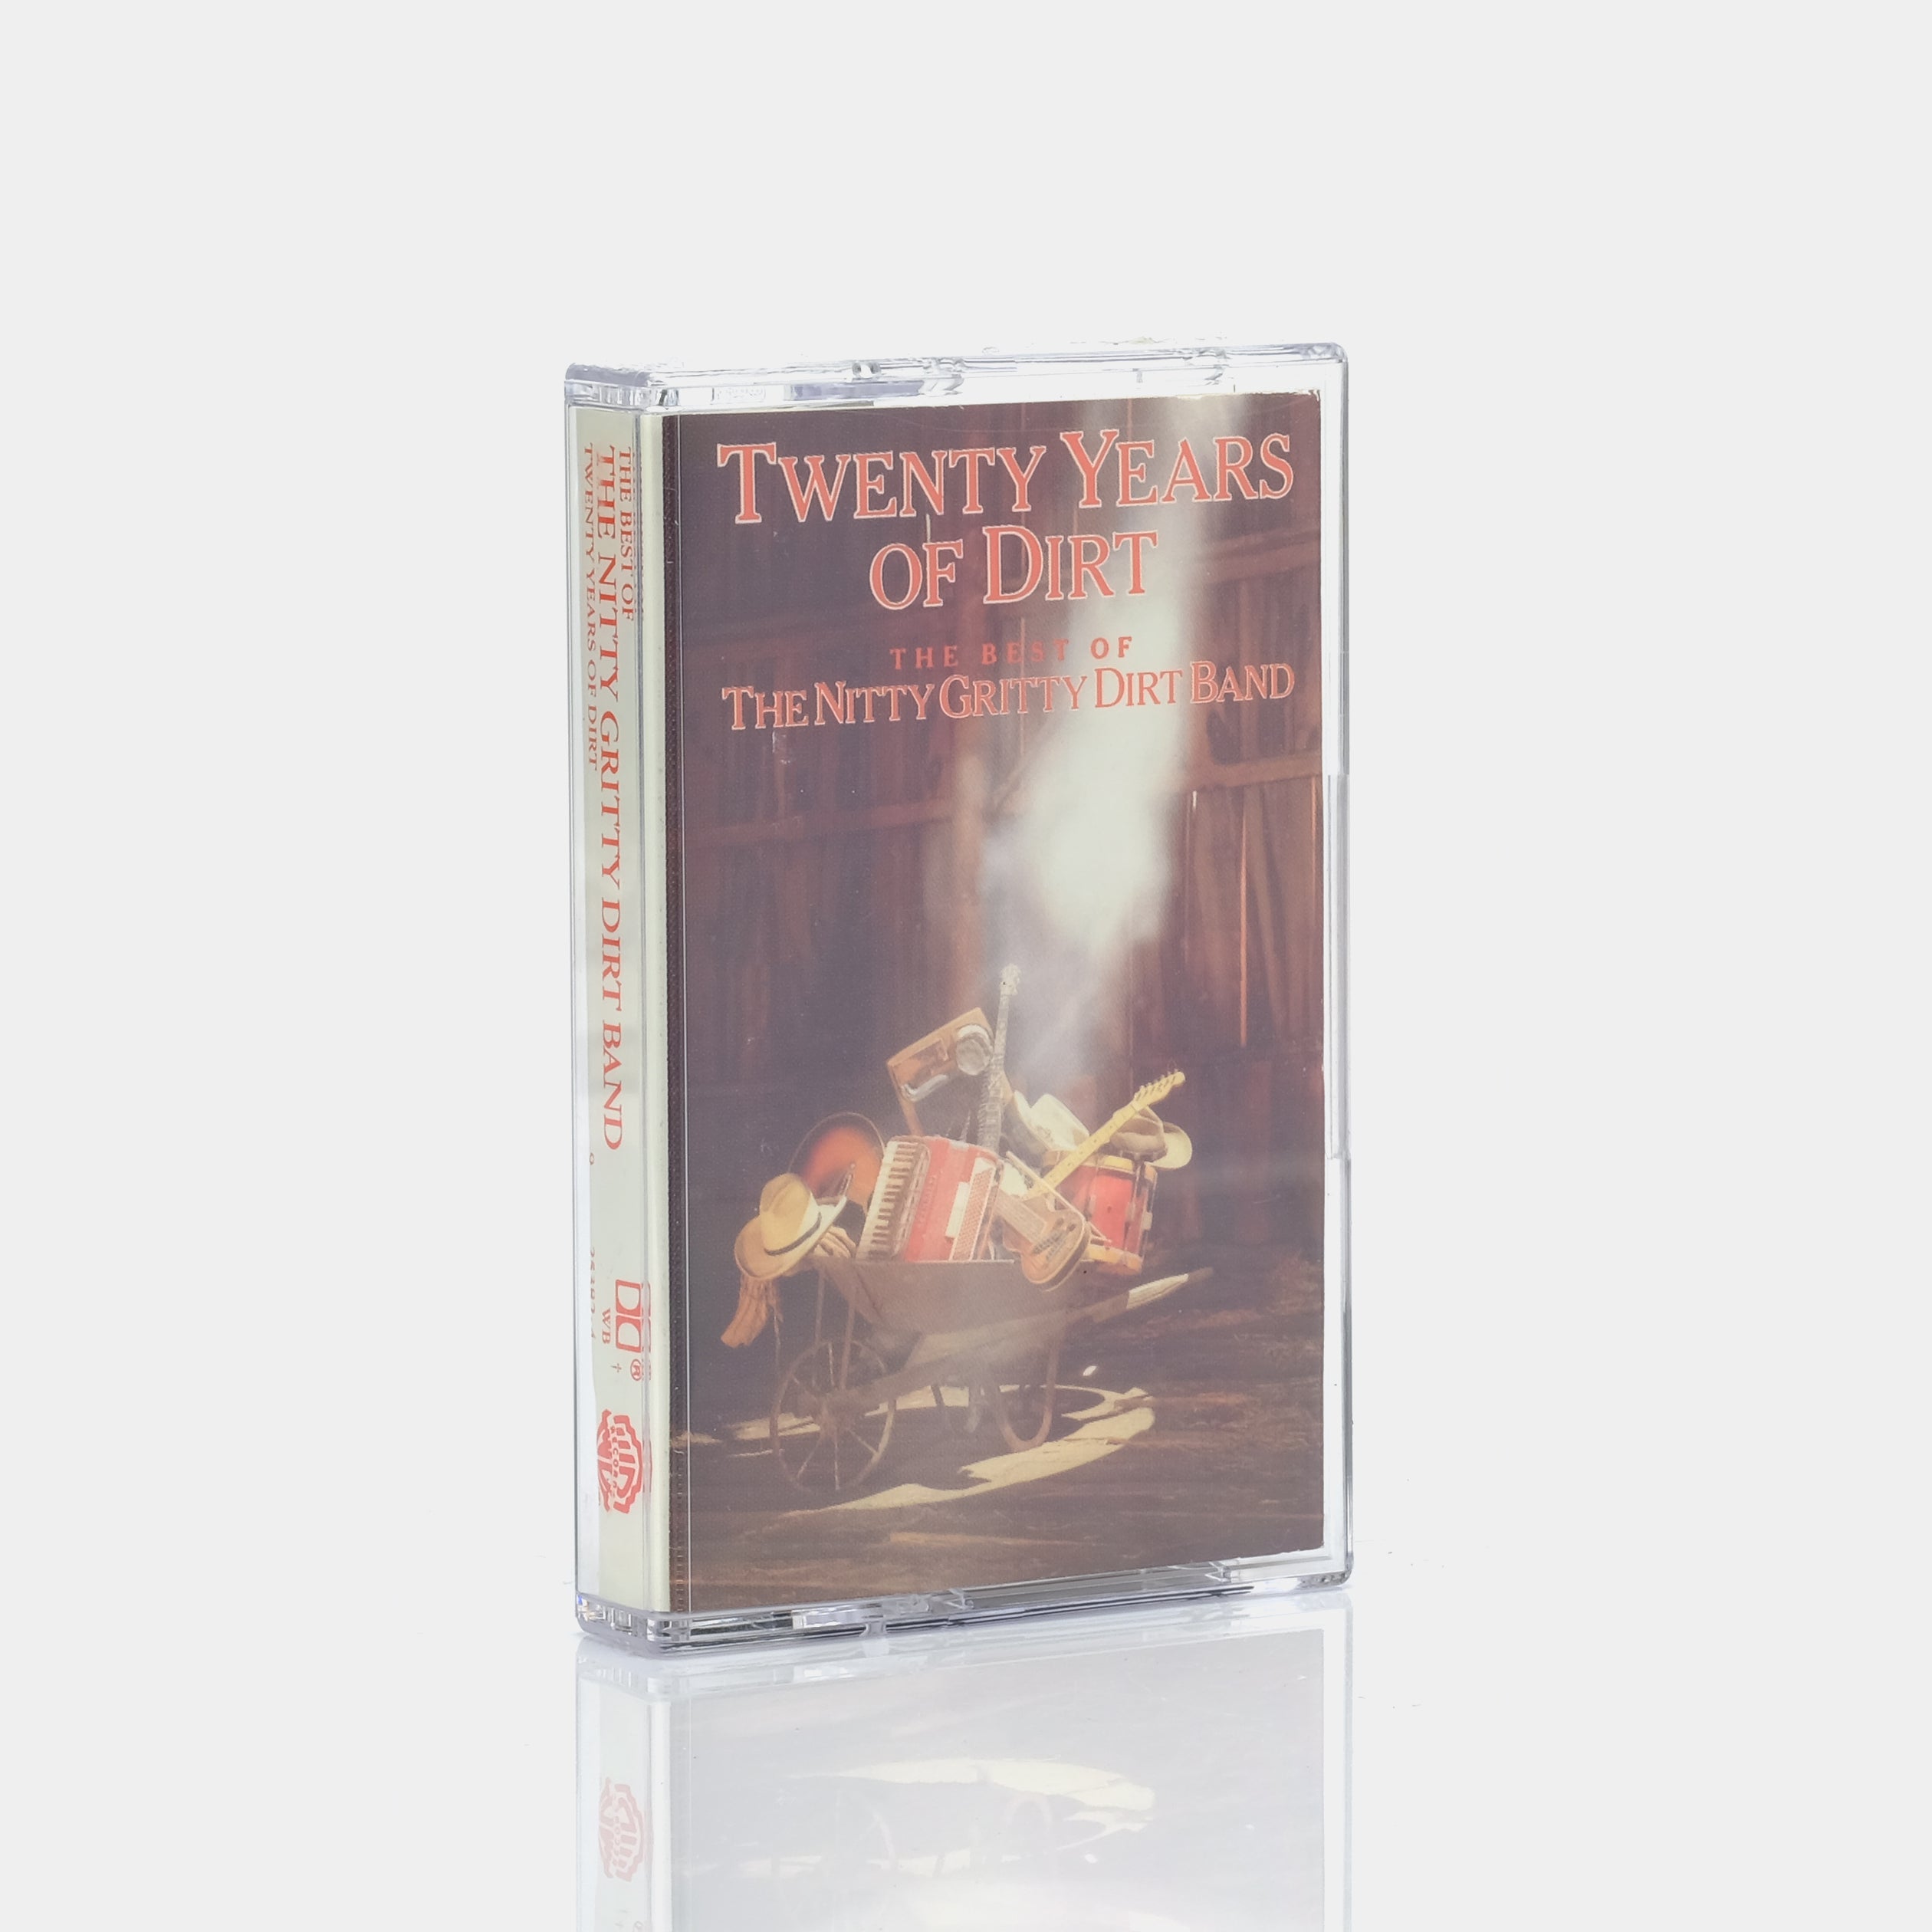 The Nitty Gritty Dirt Band - Twenty Years Of Dirt Cassette Tape